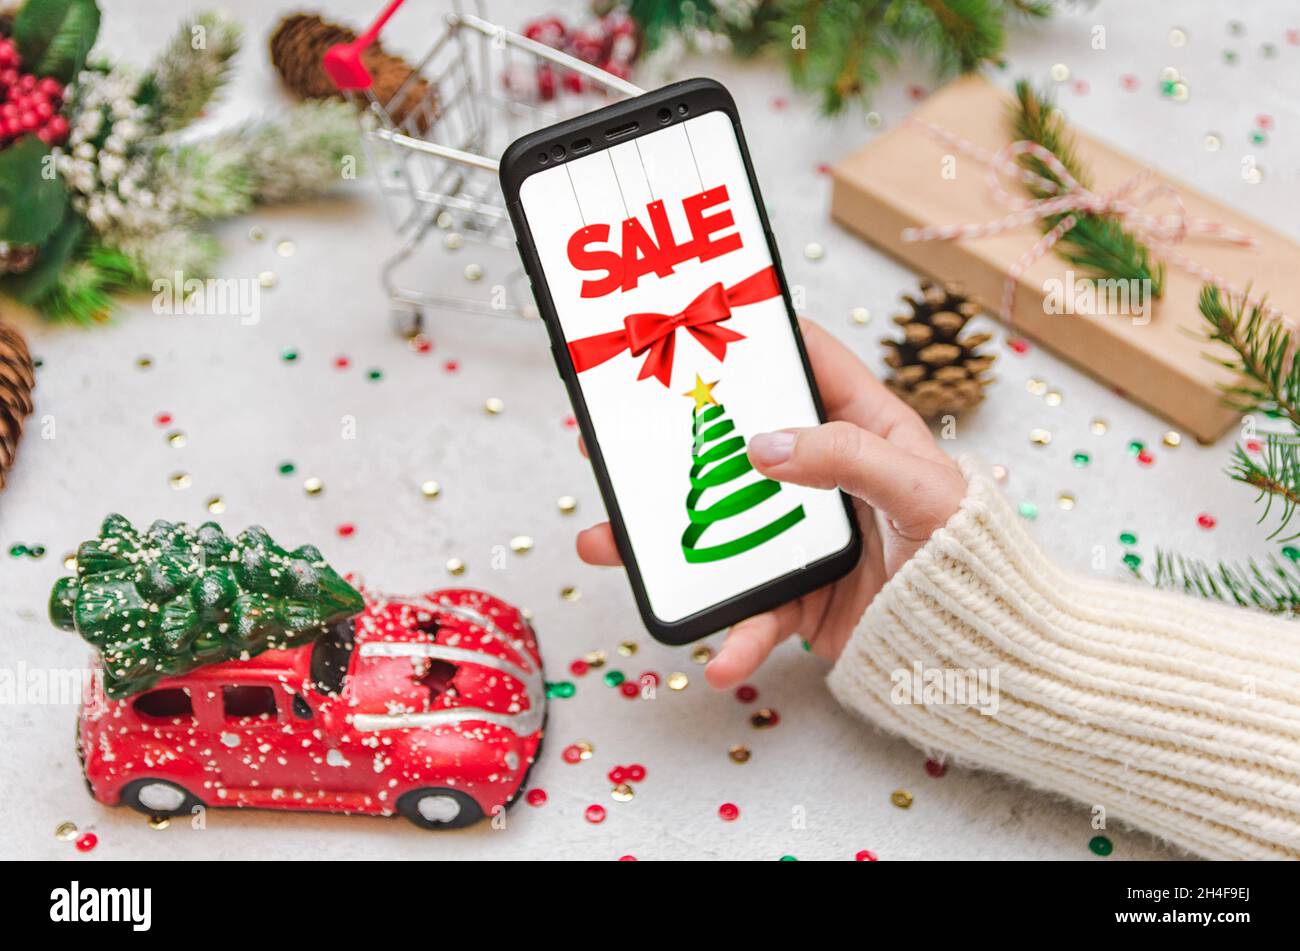 Woman in warm and cozy sweater holding a mobile phone and doing some online shopping. Christmas decorations and presents in frame on bright background Stock Photo